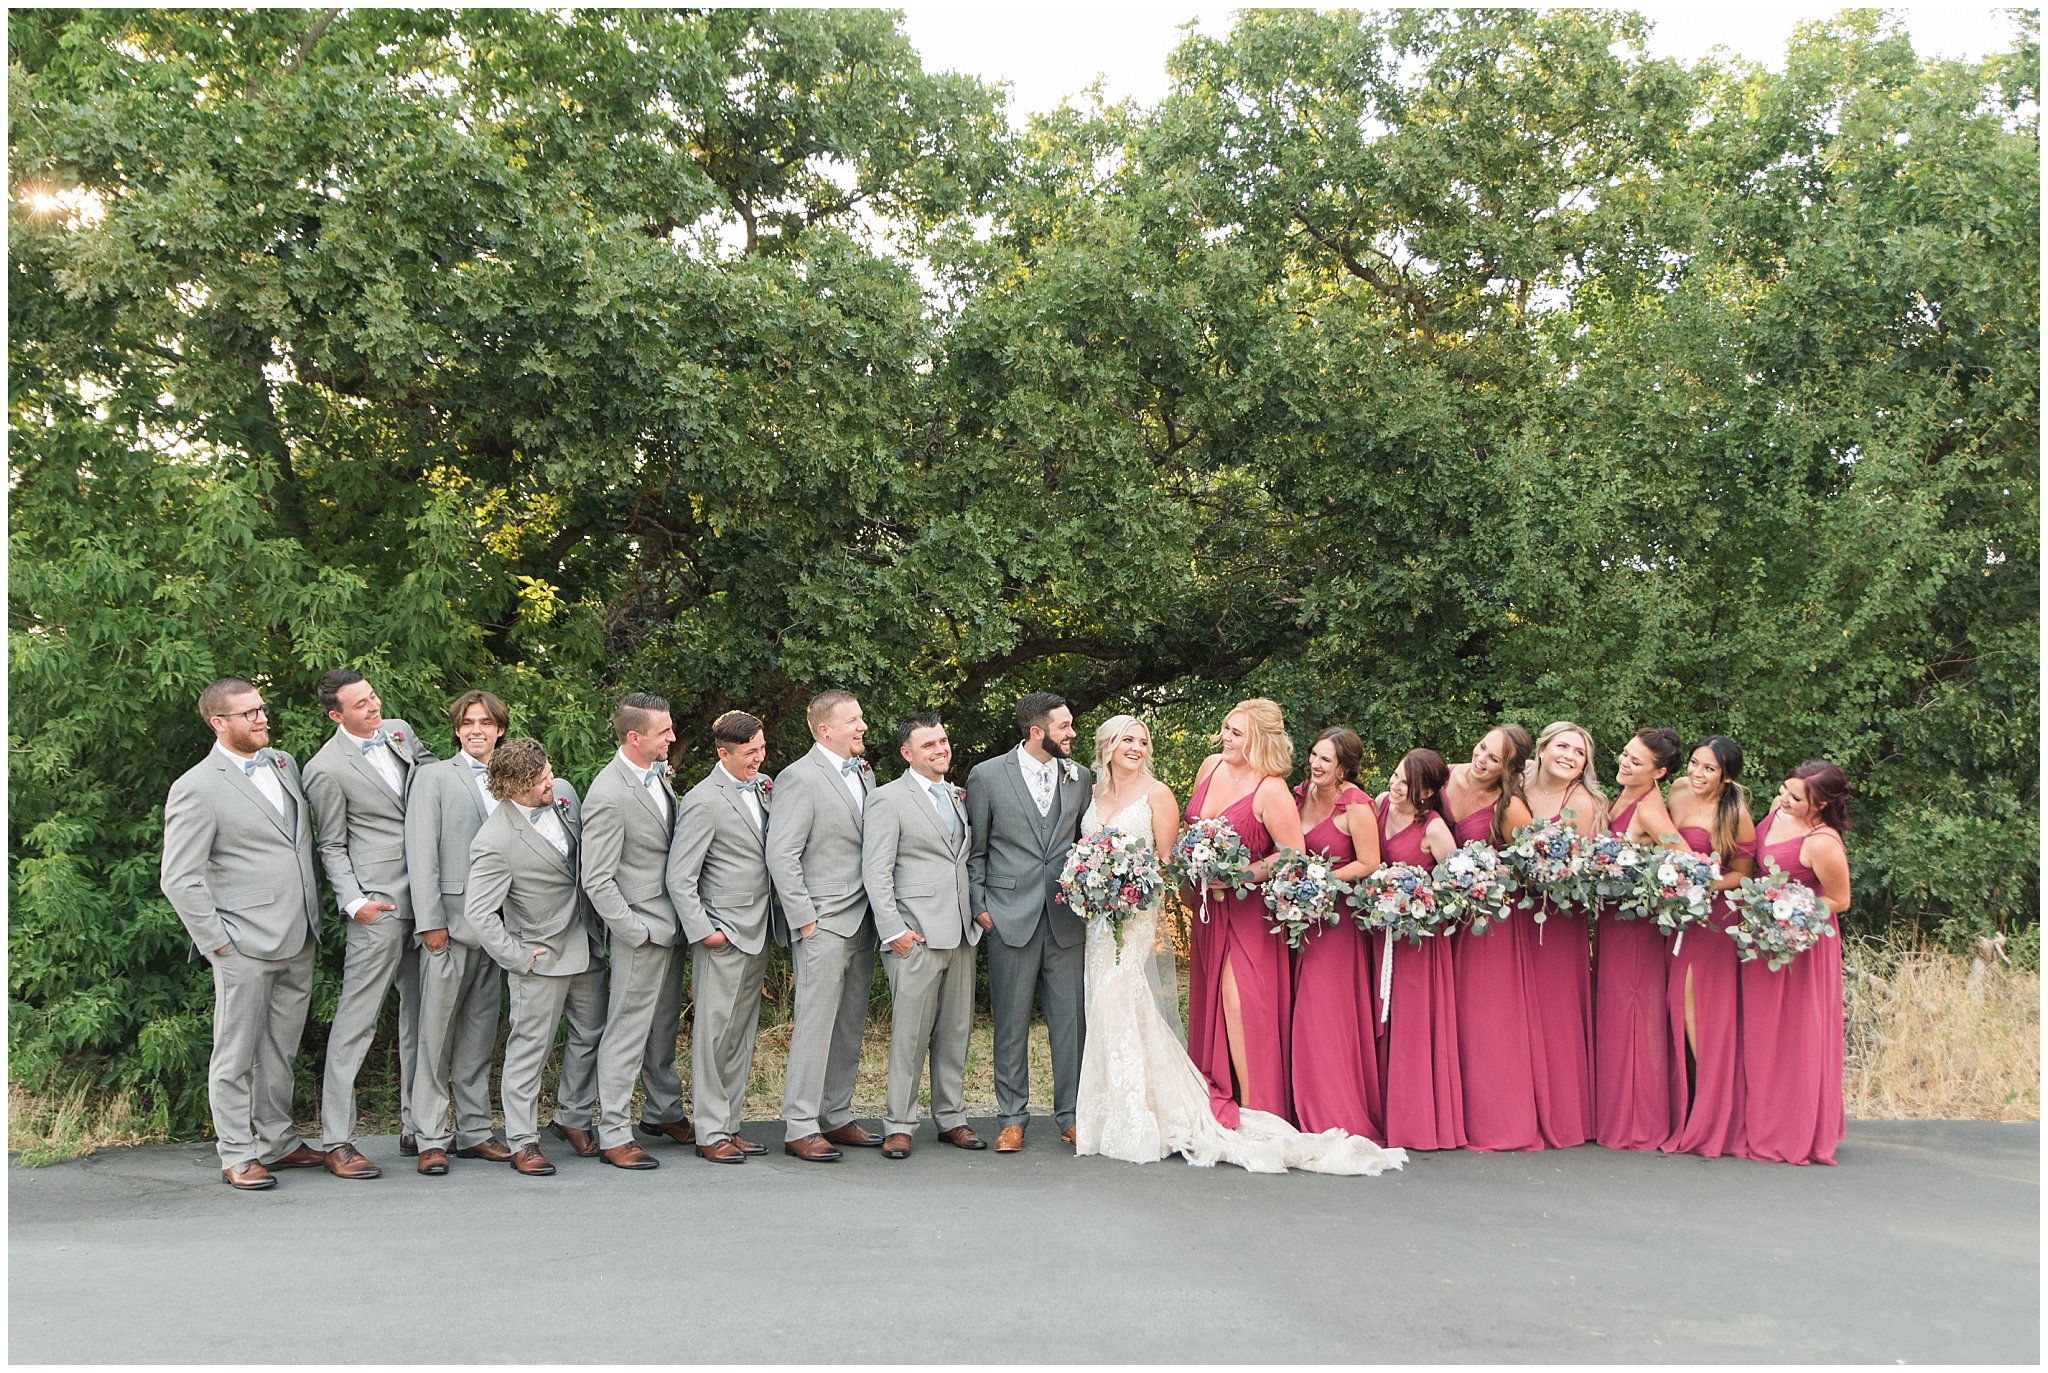 Wedding party wearing gray suits and blue ties and maroon dresses | Dusty Blue and Rose Summer Wedding at Oak Hills Utah | Jessie and Dallin Photography